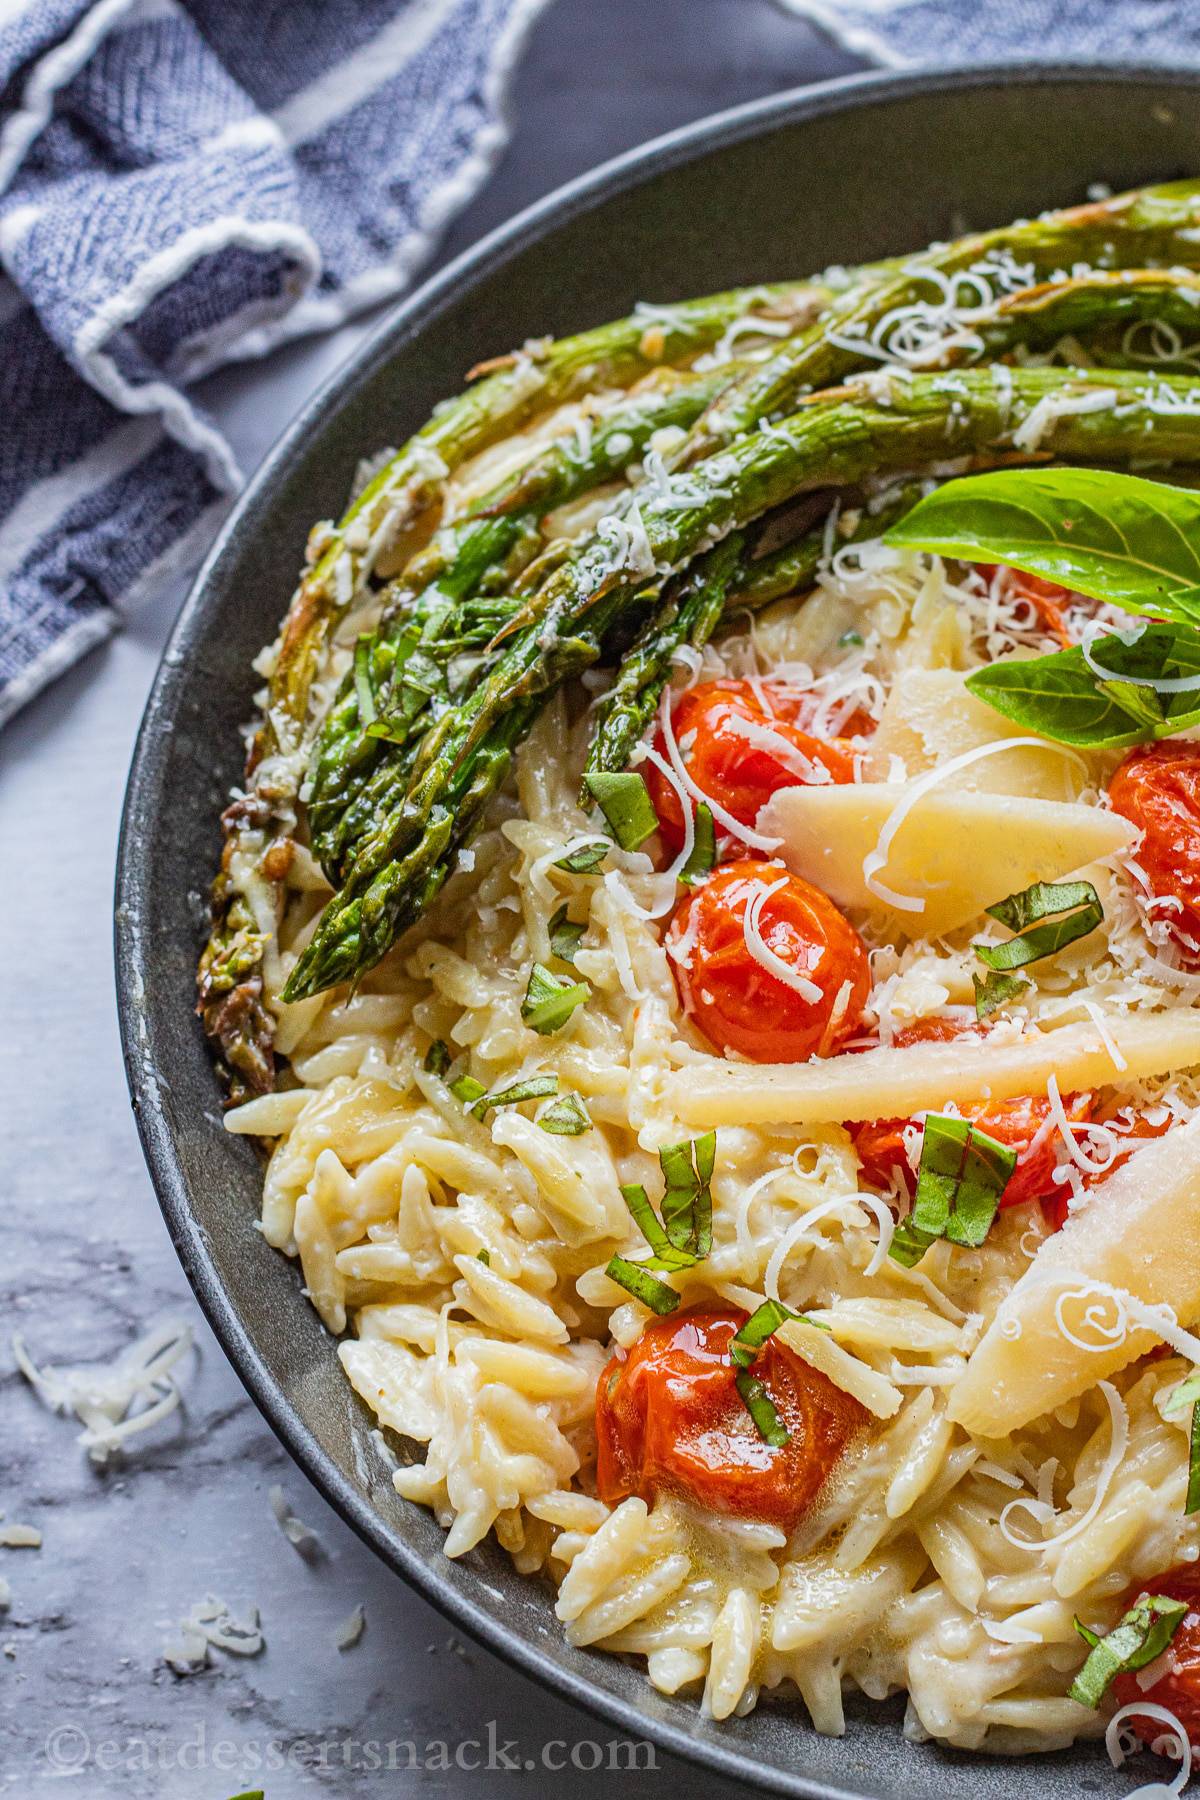 Black pan of cooked orzo, roasted asparagus and tomatoes, parmesan cheese on top with blue tea towel.